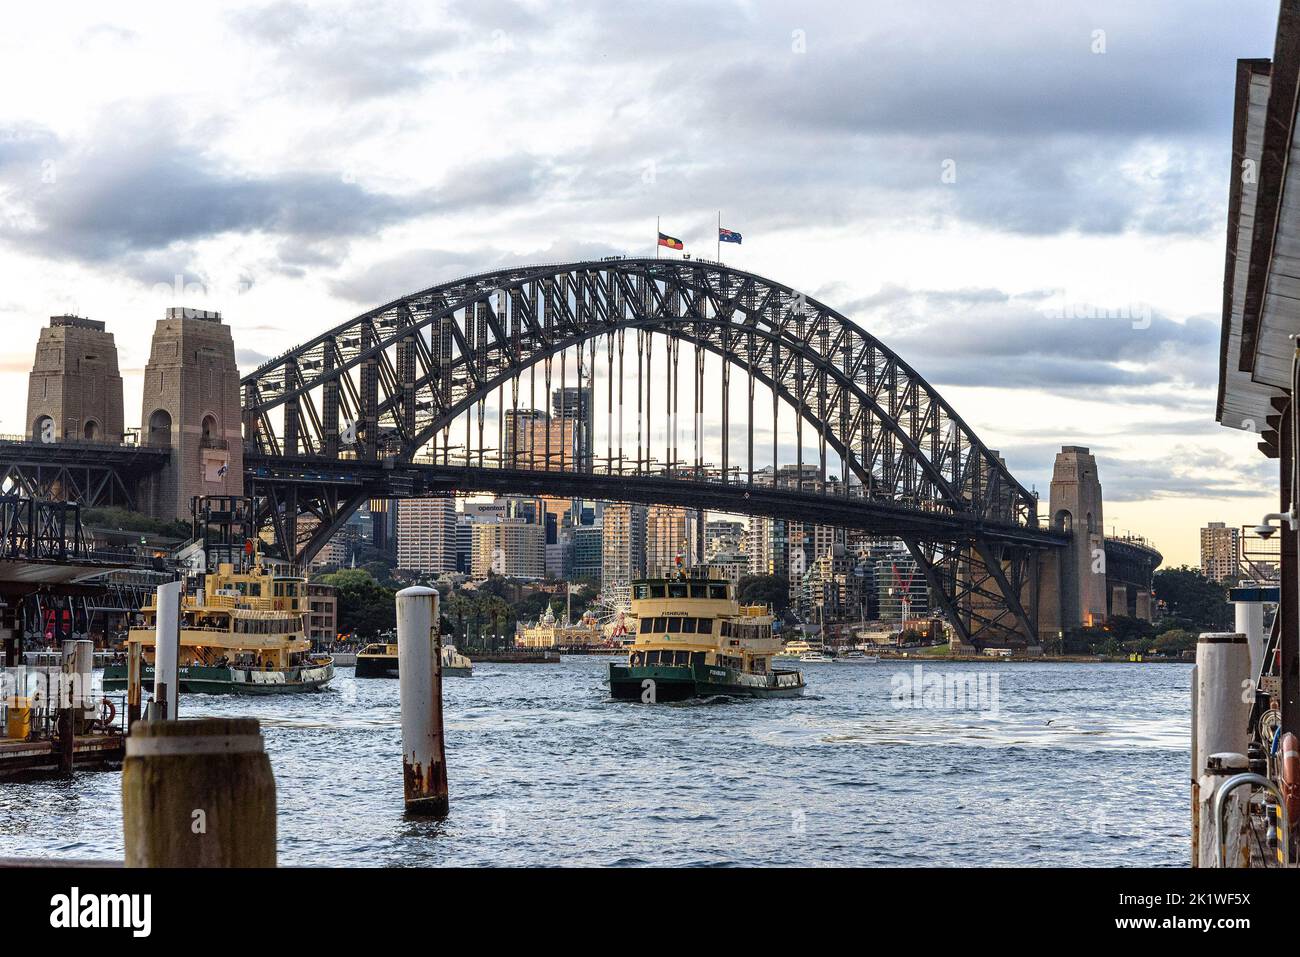 The First Flees class ferry 'Fishburn' passing in front of the Sydney Harbour Bridge Stock Photo